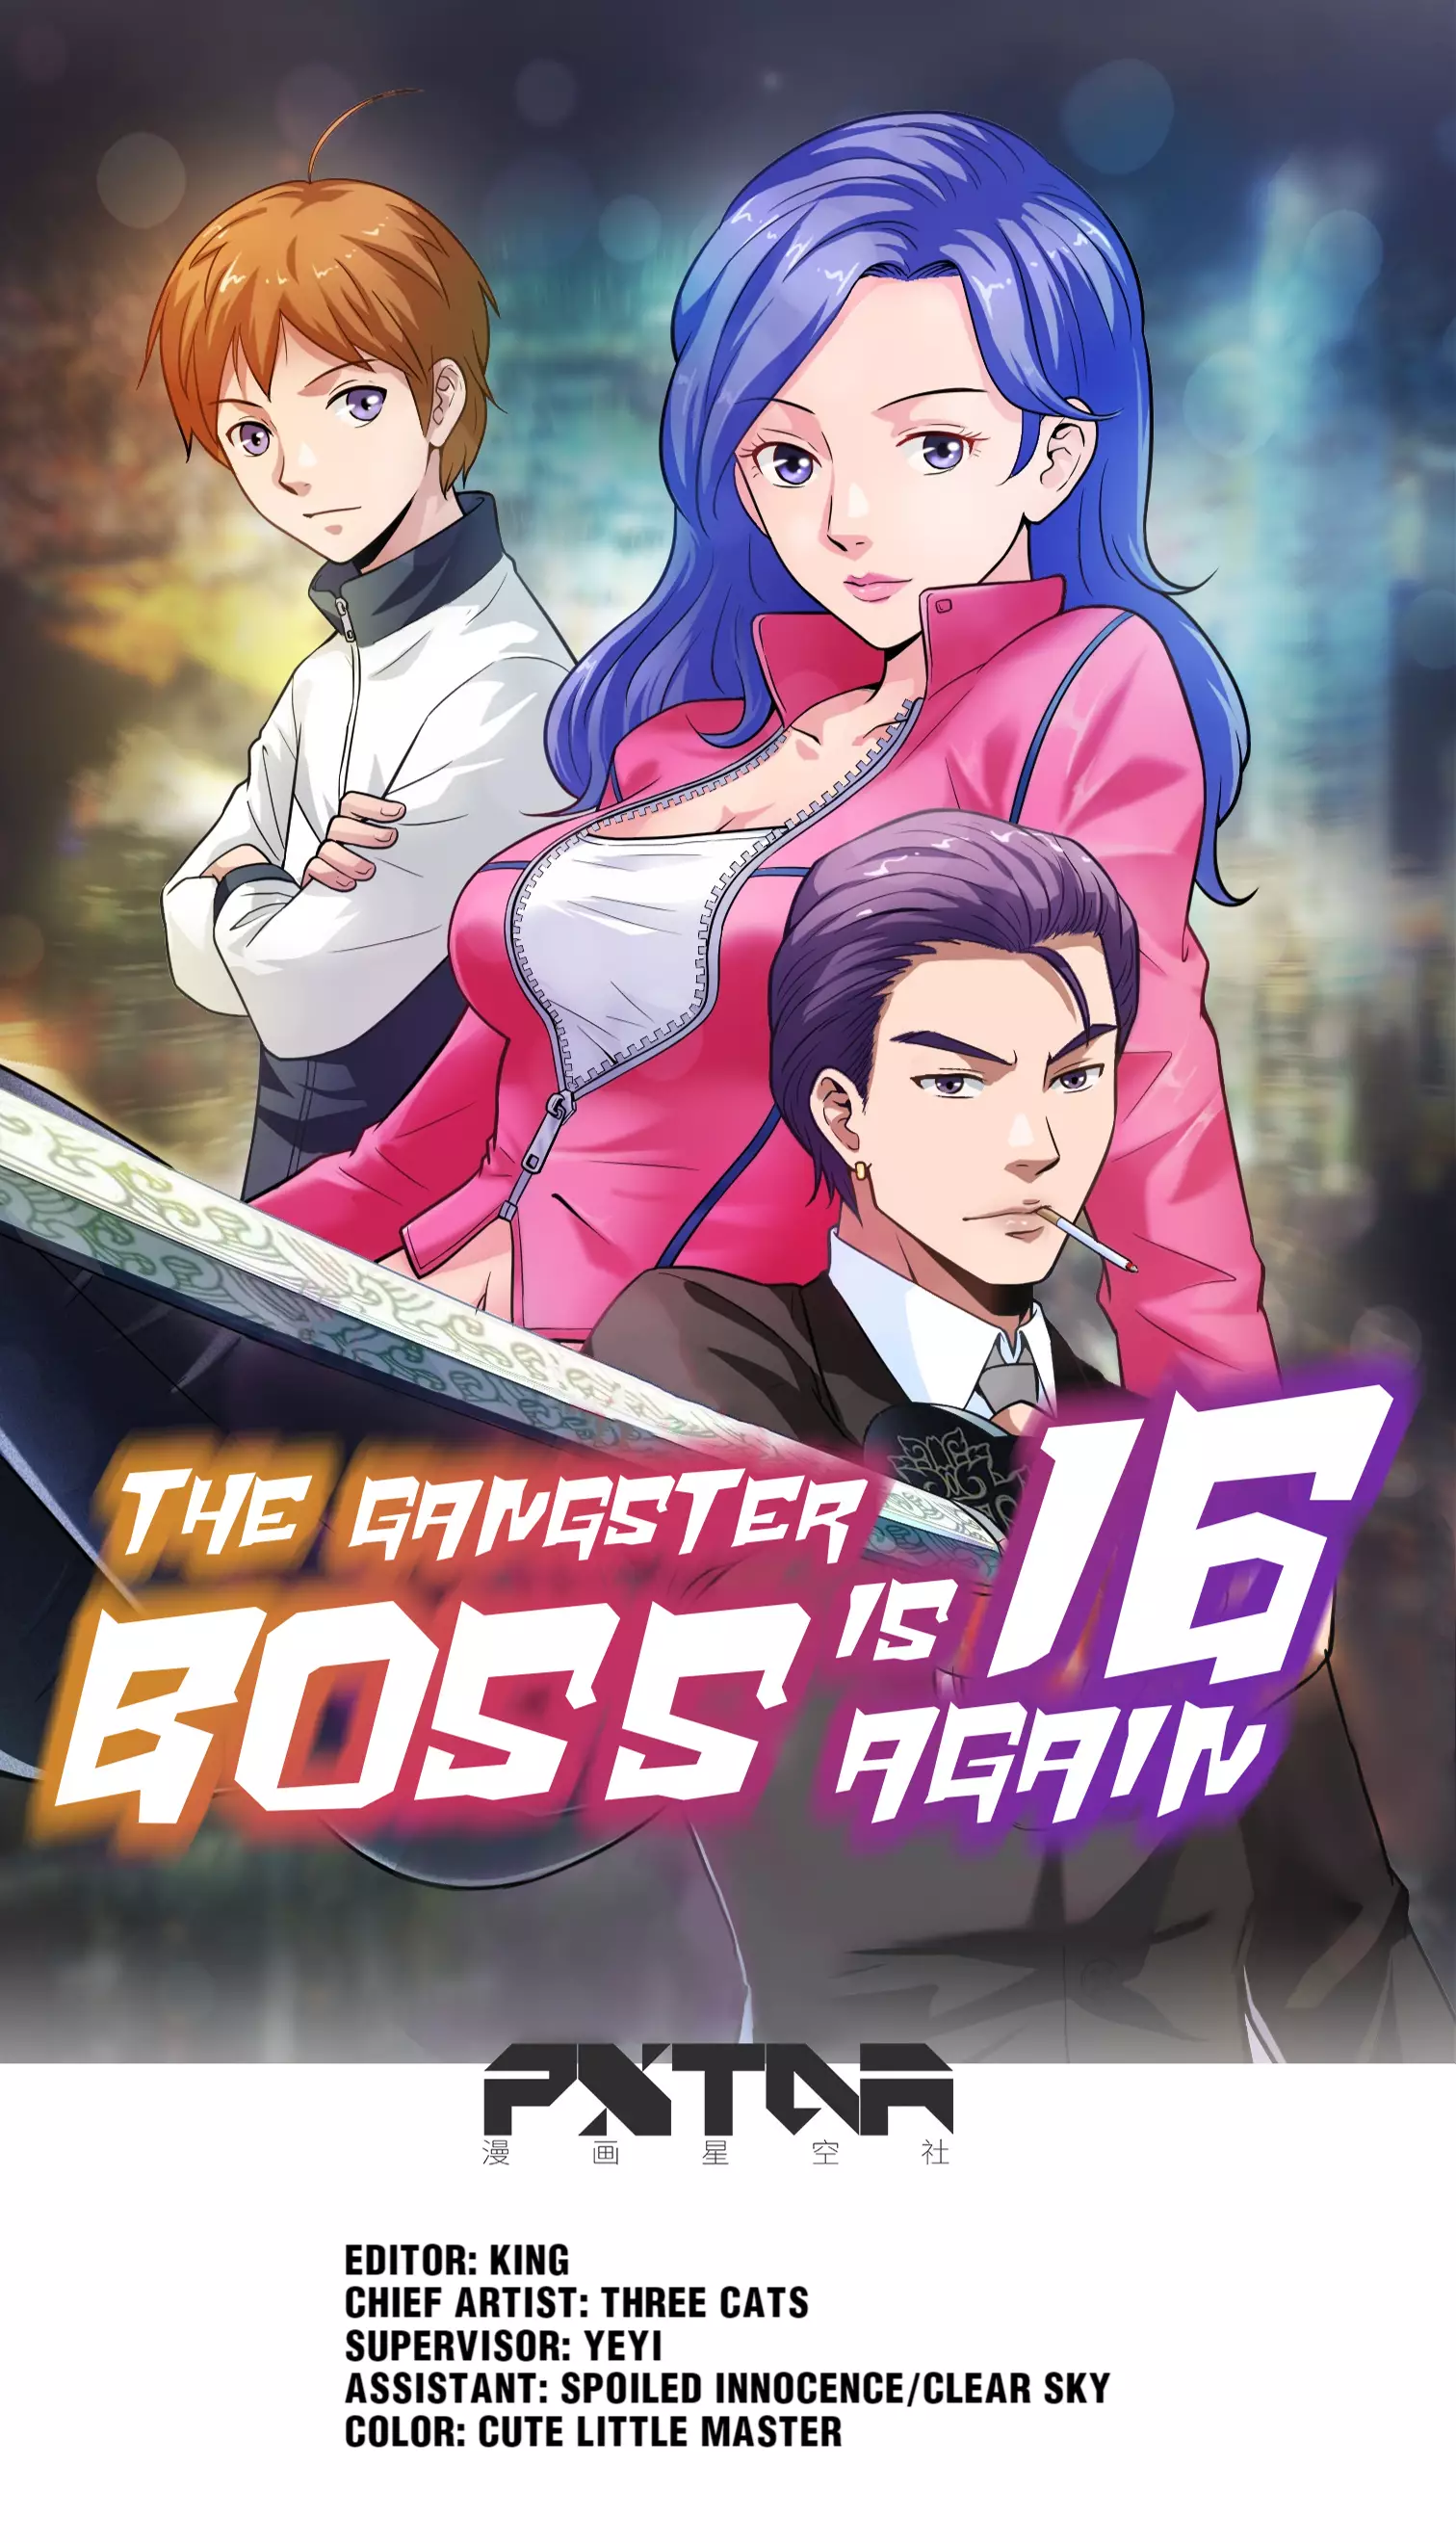 The Gangster Boss Is 16 Again - 33.1 page 1-1aa49cbc